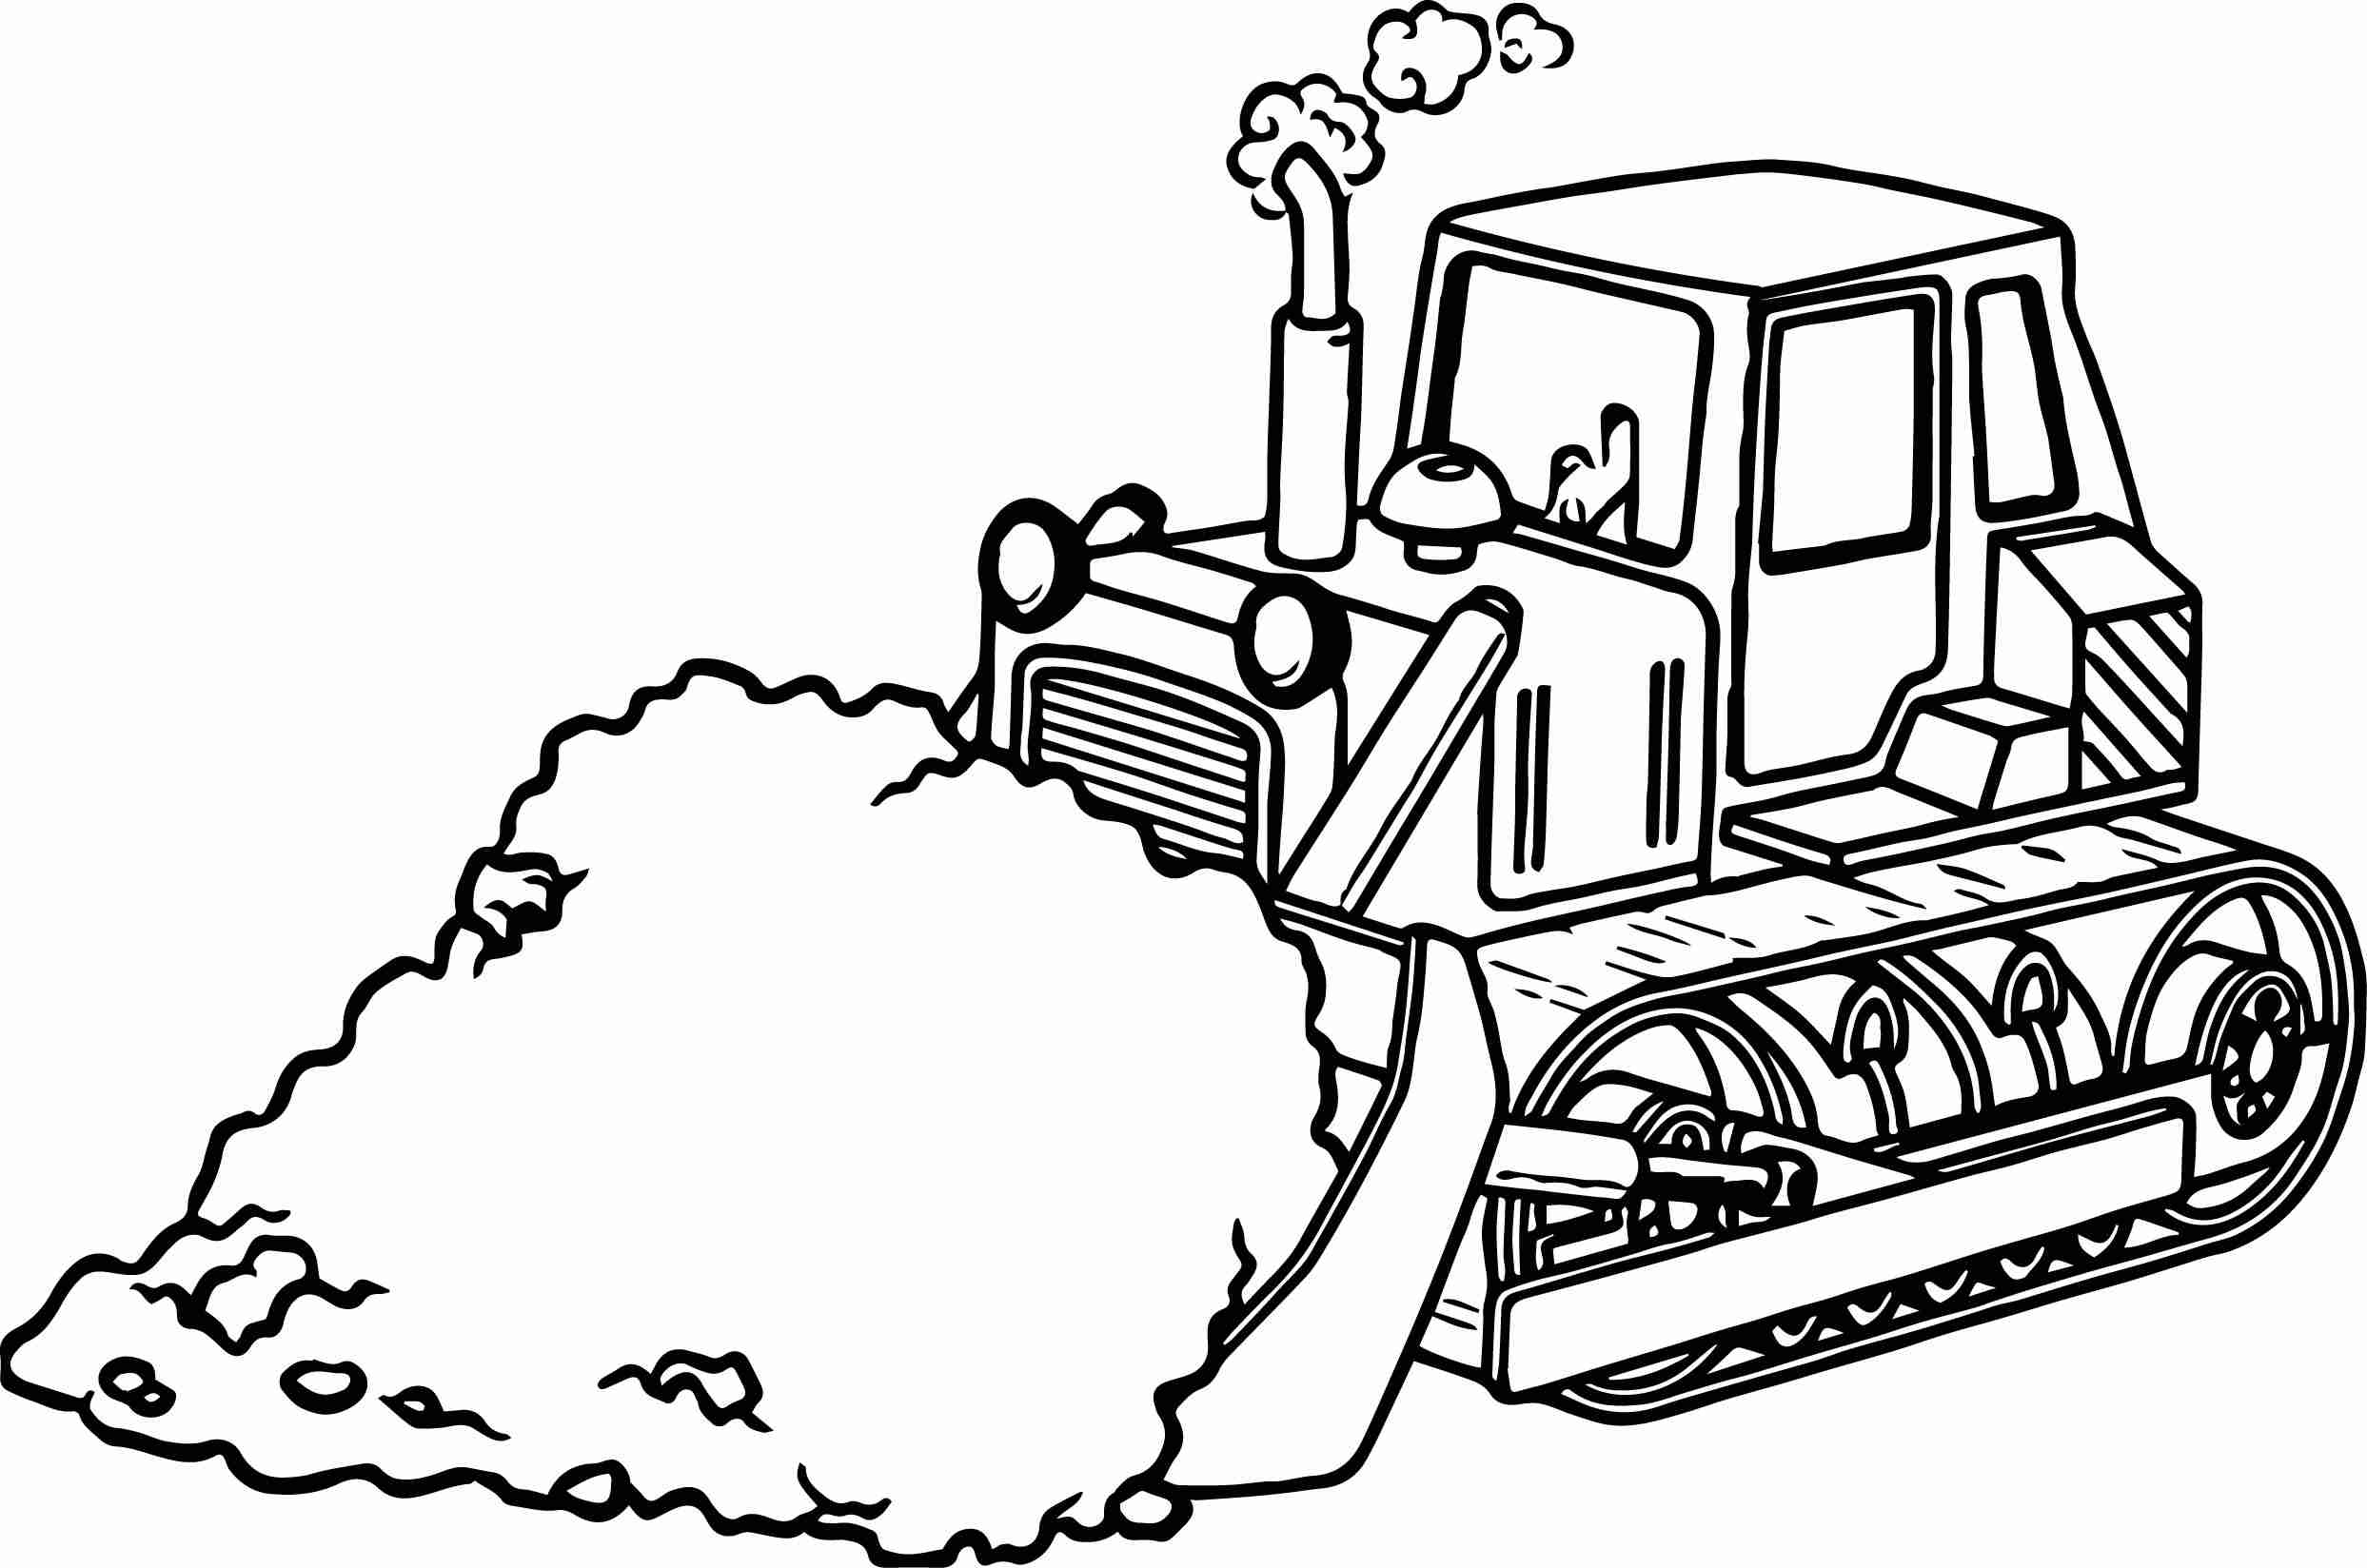 Dozer Coloring Pages at GetColorings.com   Free printable colorings ...